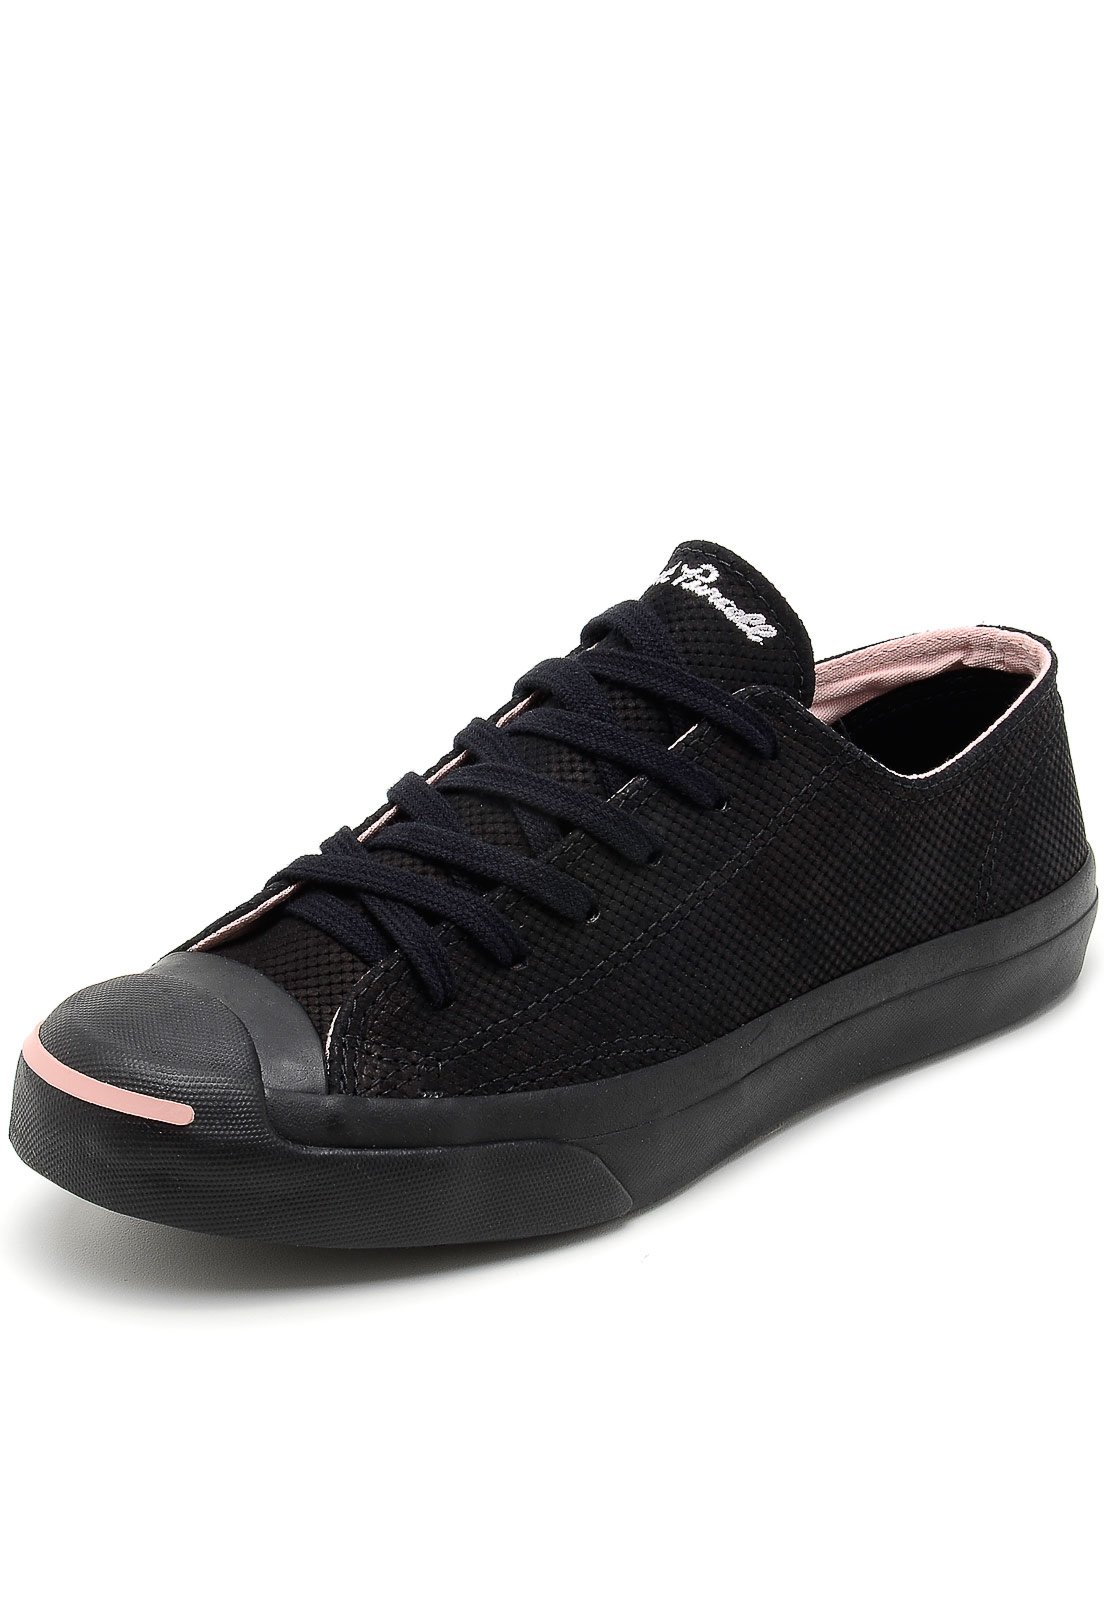 converse jack purcell couro